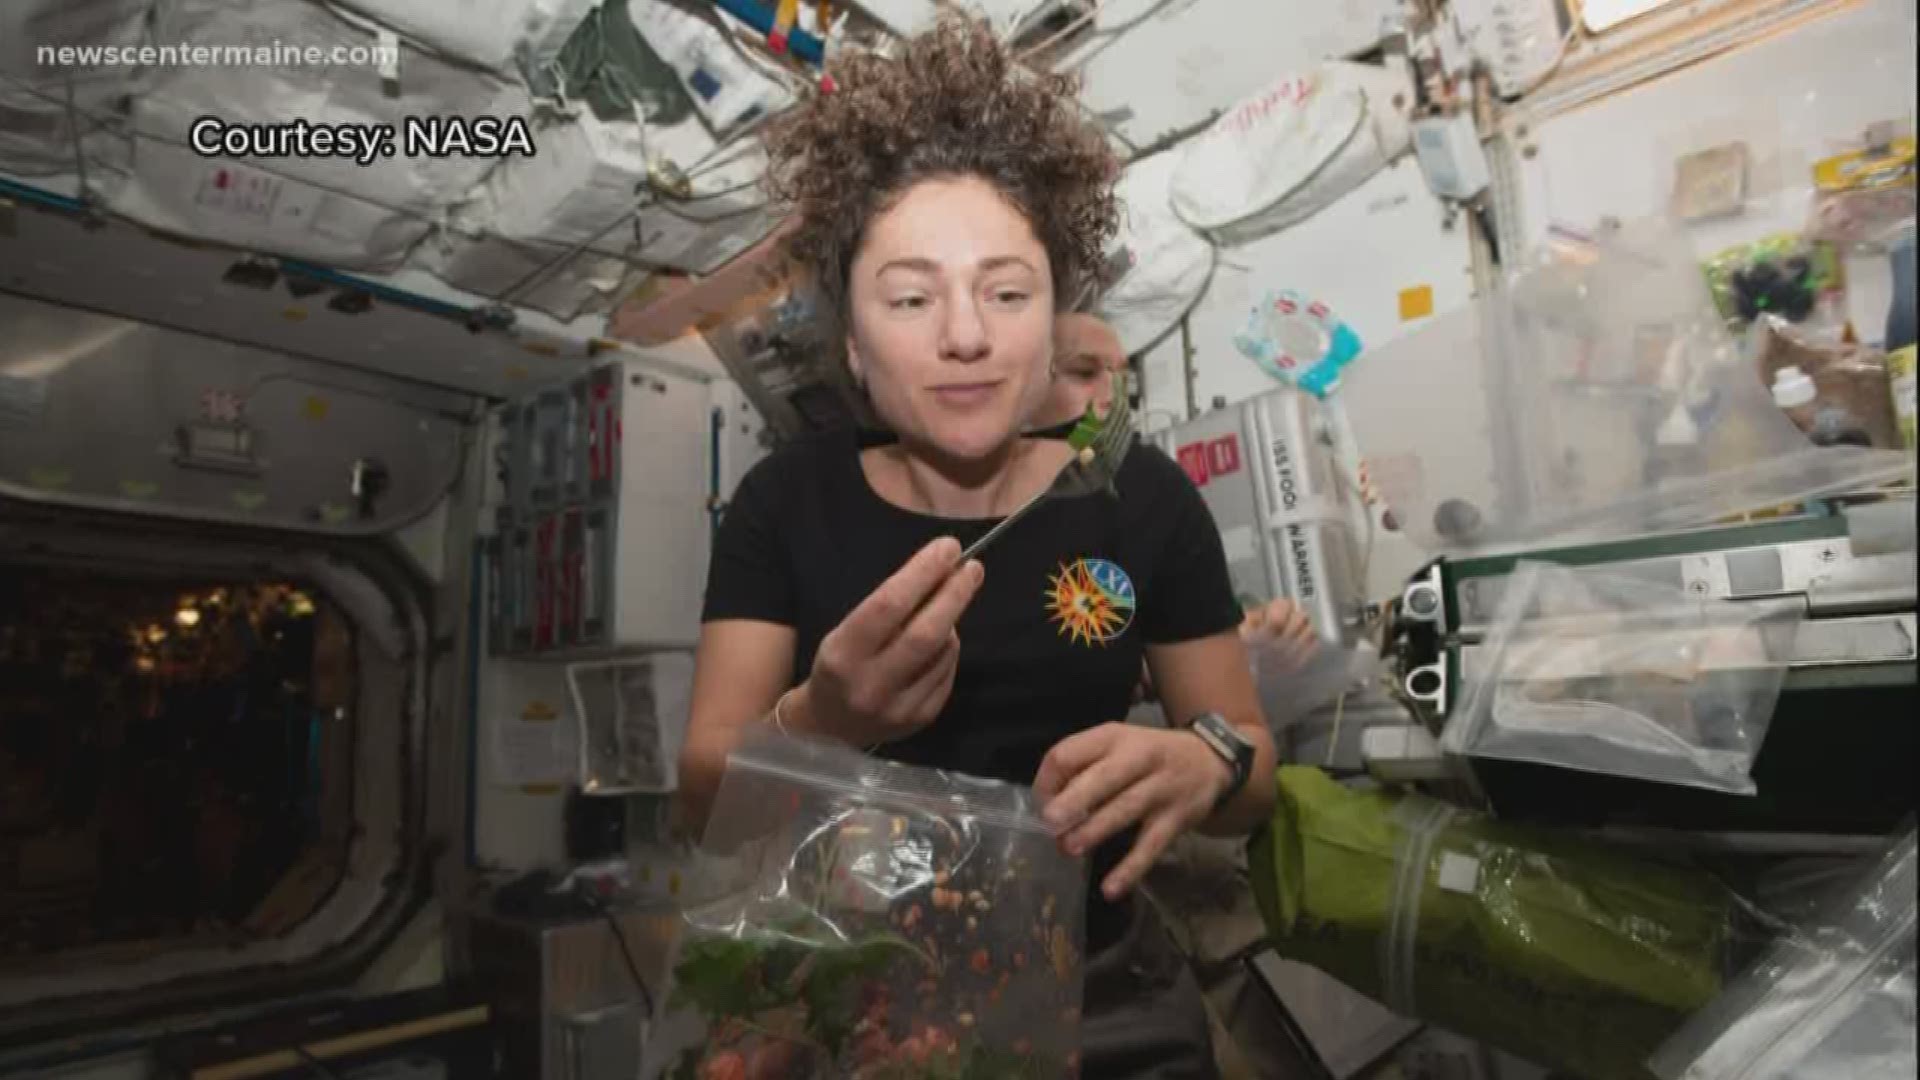 Maine astronaut Dr. Jessica Meir will take a spacewalk on Wednesday with fellow astronaut Christina Koch. They will upgrade batteries used to store solar energy.